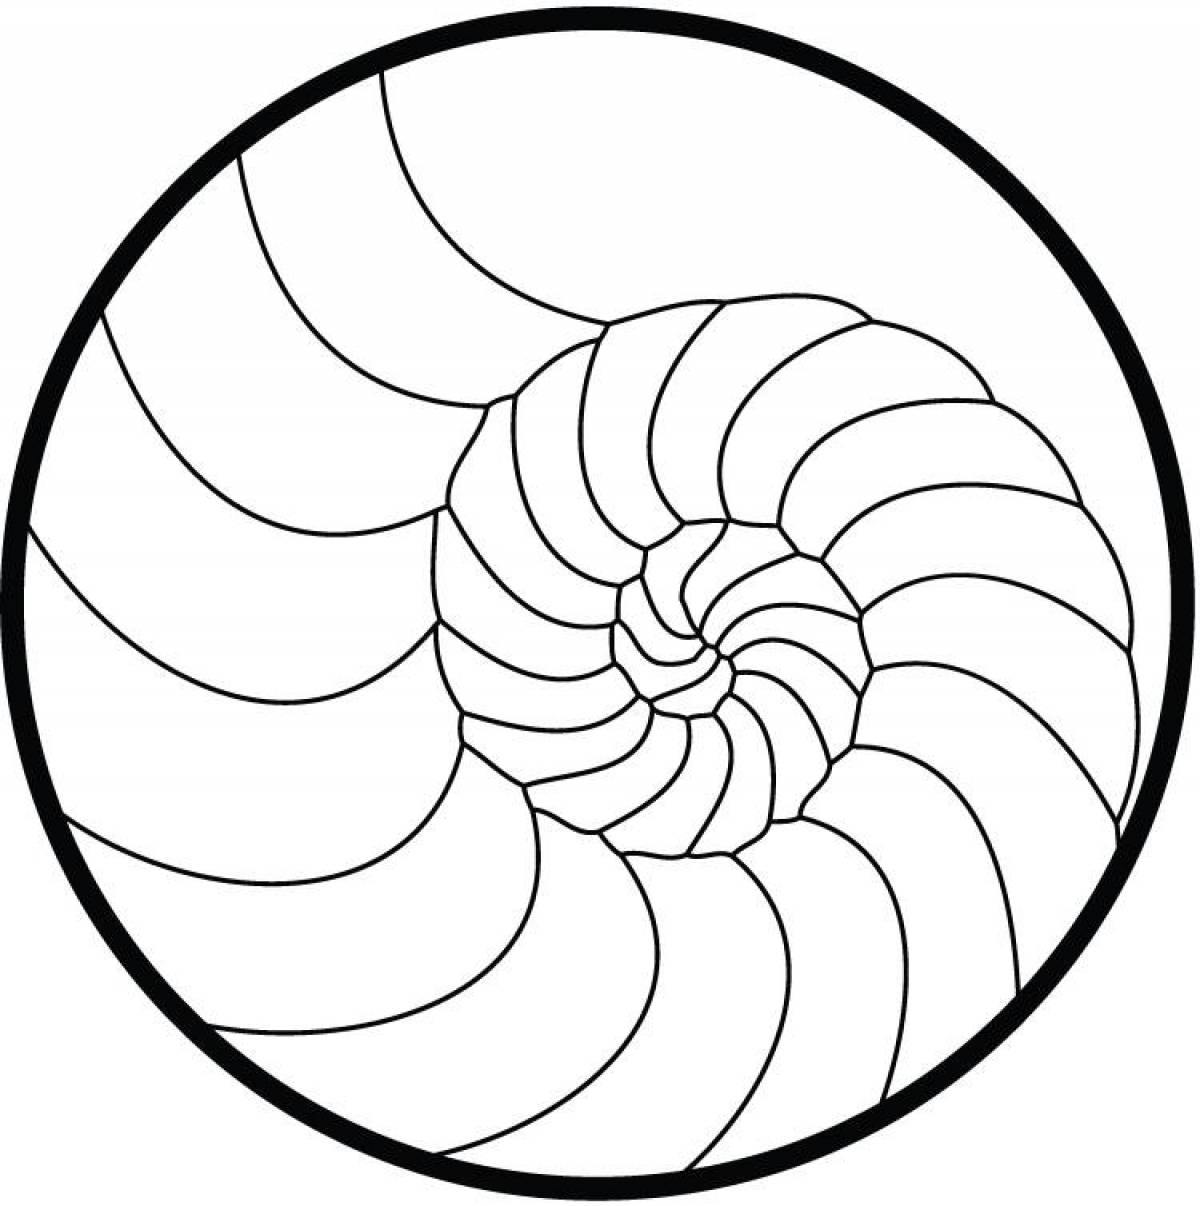 Create coloring page bright spiral